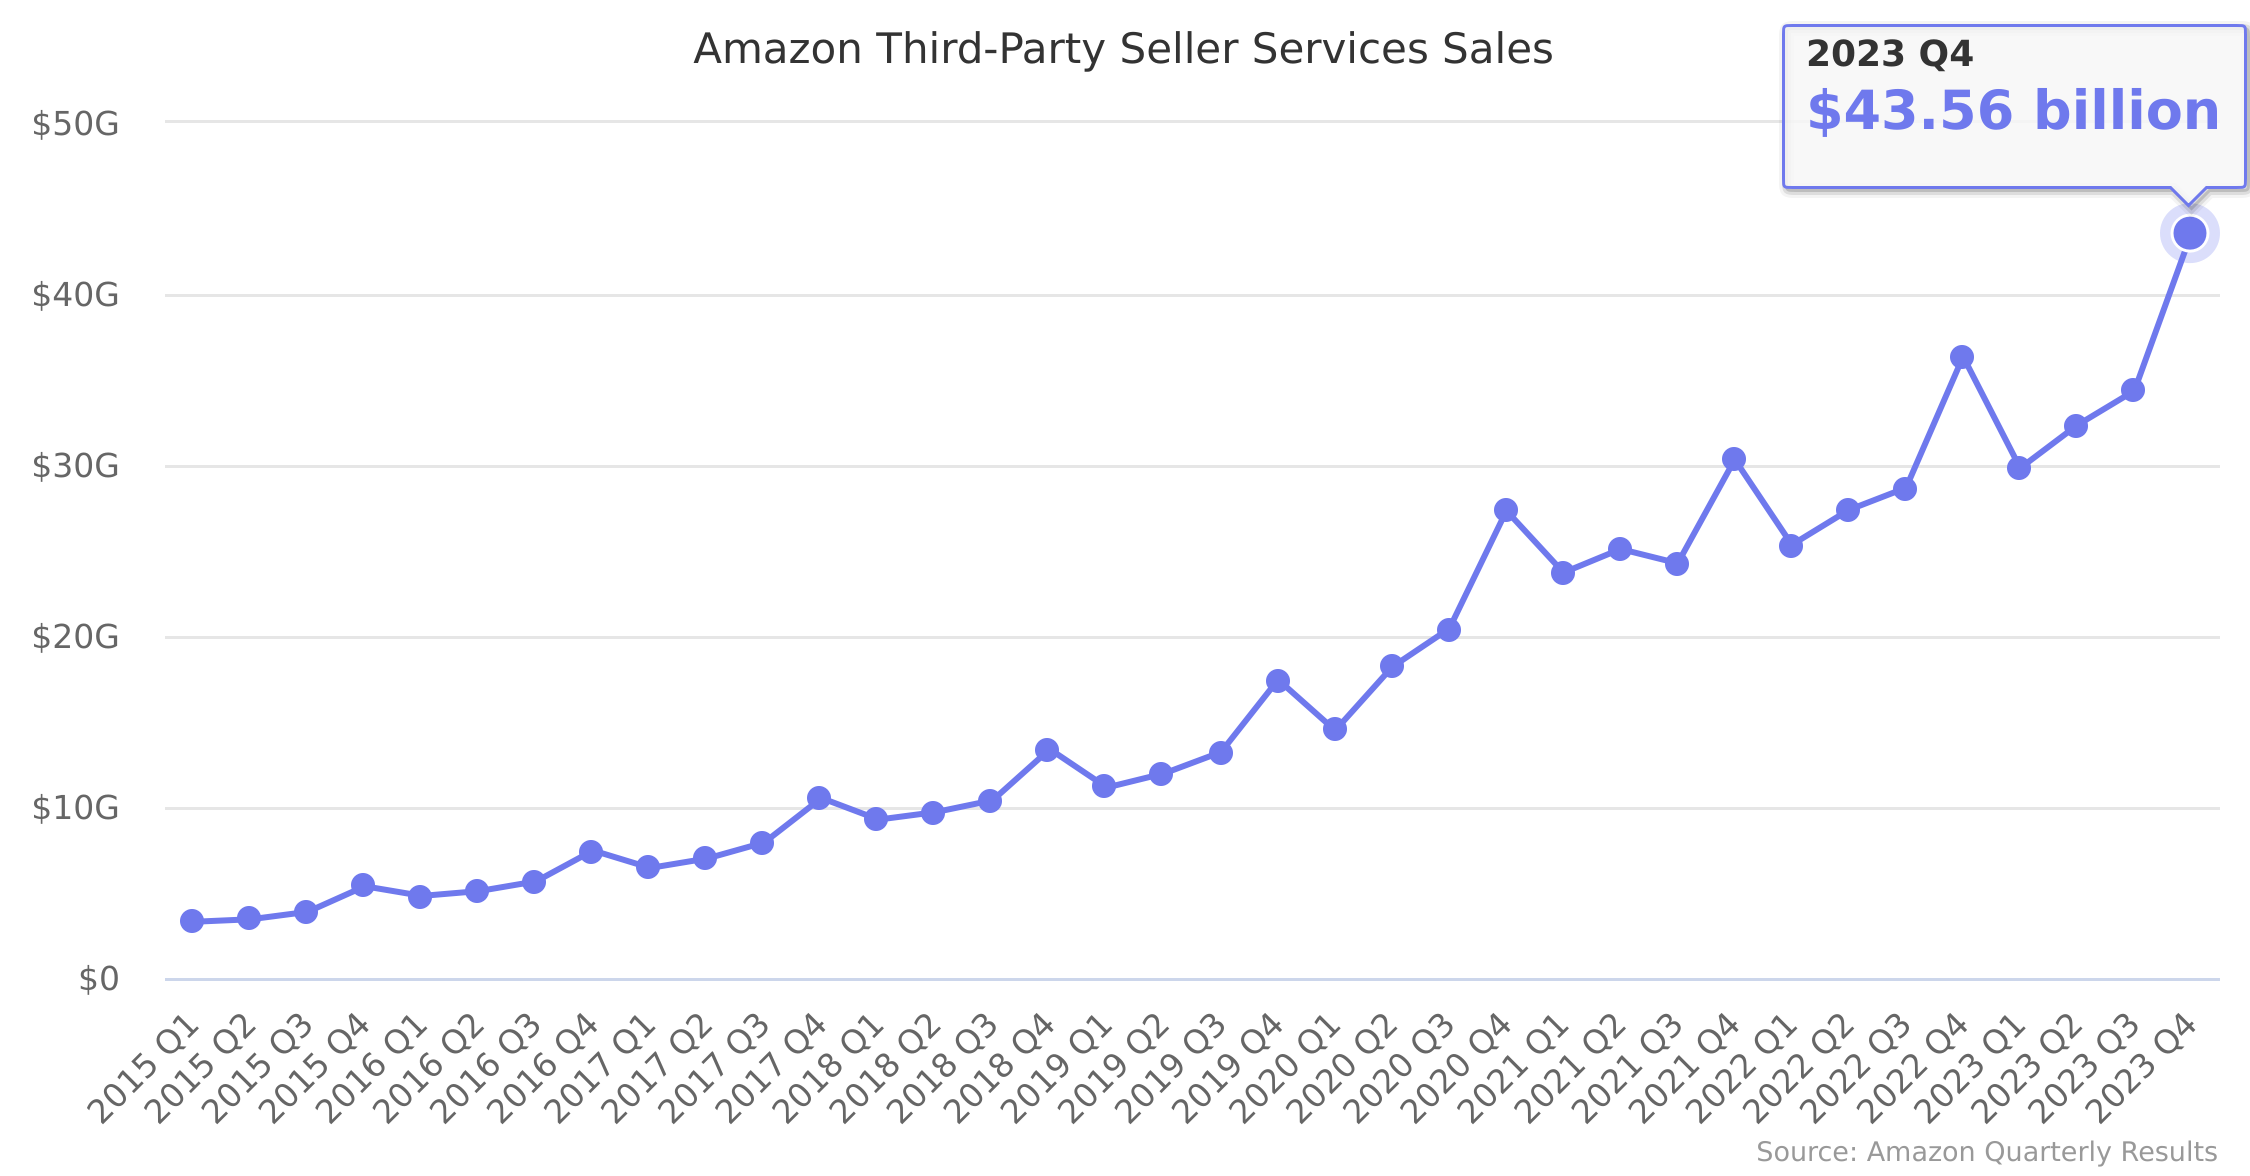 Amazon Third-Party Seller Services Sales 2015-2022